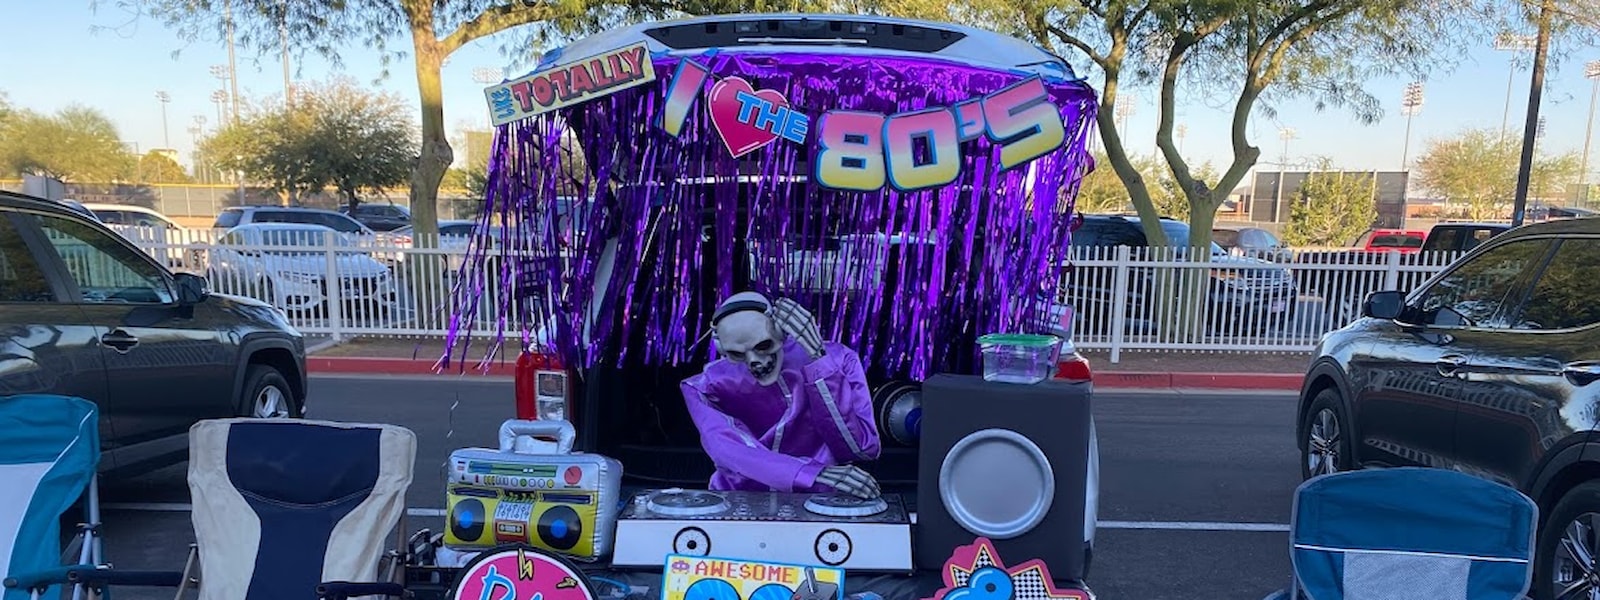 Festival event showing a skeleton disk jockey, record player, blow up boom box/radio and fake speakers with "I Love the 80s" hanging decoration.